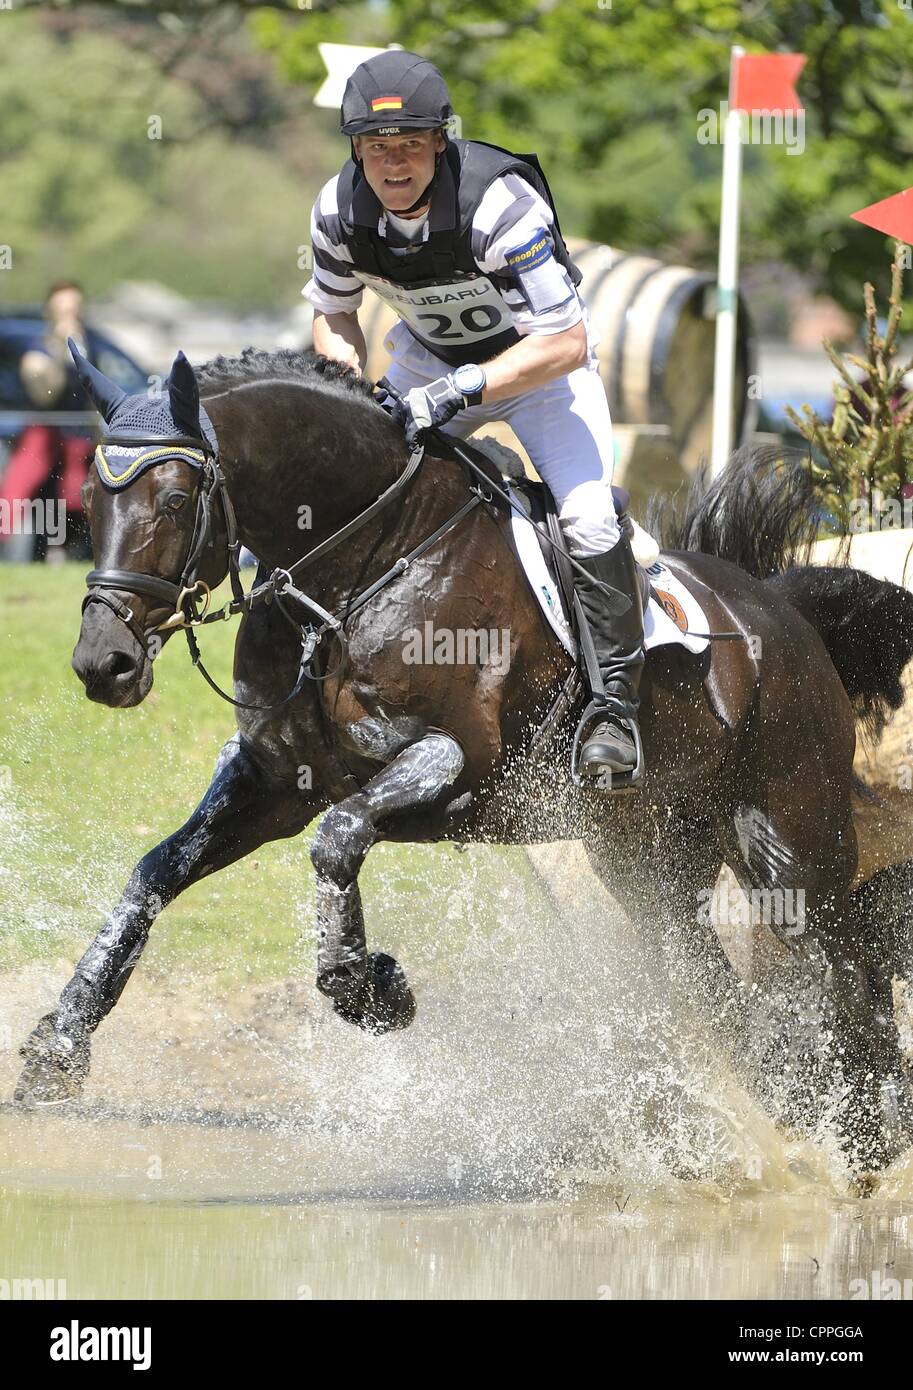 26.05.2012 Houghton Hall, England. Andreas Ostholt (GER) FRANCO JEAS in action during the Cross Country Phase at the Subaru Houghton International Horse Trials. Stock Photo